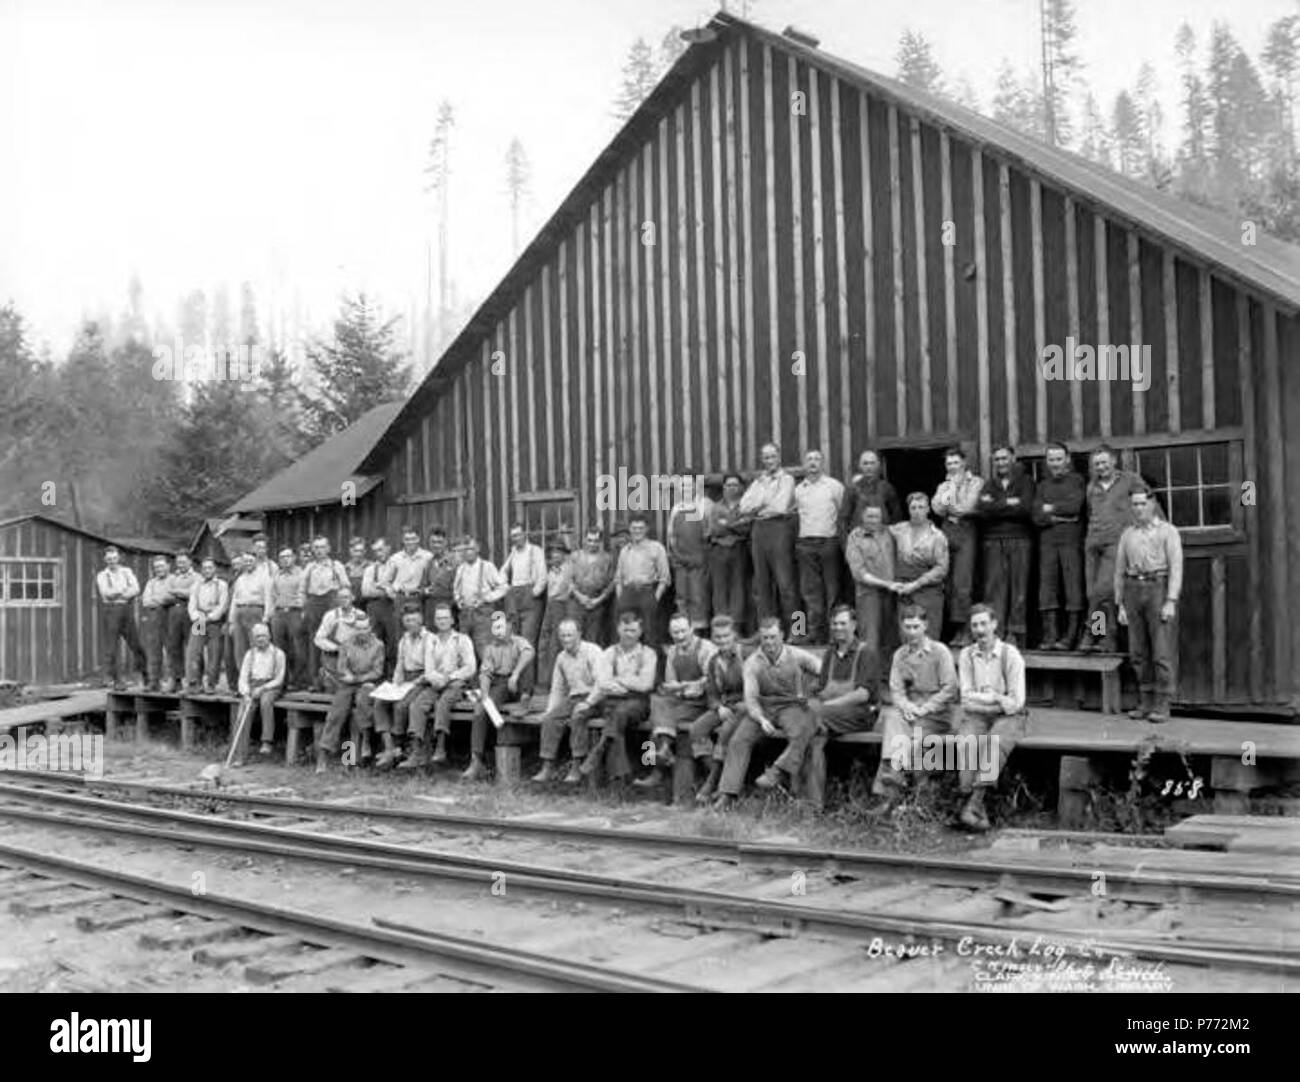 . English: Crew posing at camp behind railroad tracks, Beaver Creek Logging Company, Vernonia, ca. 1922 . English: This company probably operated in Vernonia, Oregon with headquarters in Portland and became the Connacher Logging Company in 1925. Caption on image: Beaver Creek Log Col, No. 858 PH Coll 516.60 Subjects (LCSH): xyz  . circa 1922 3 Crew posing at camp behind railroad tracks, Beaver Creek Logging Company, Vernonia, ca 1922 (KINSEY 2086) Stock Photo